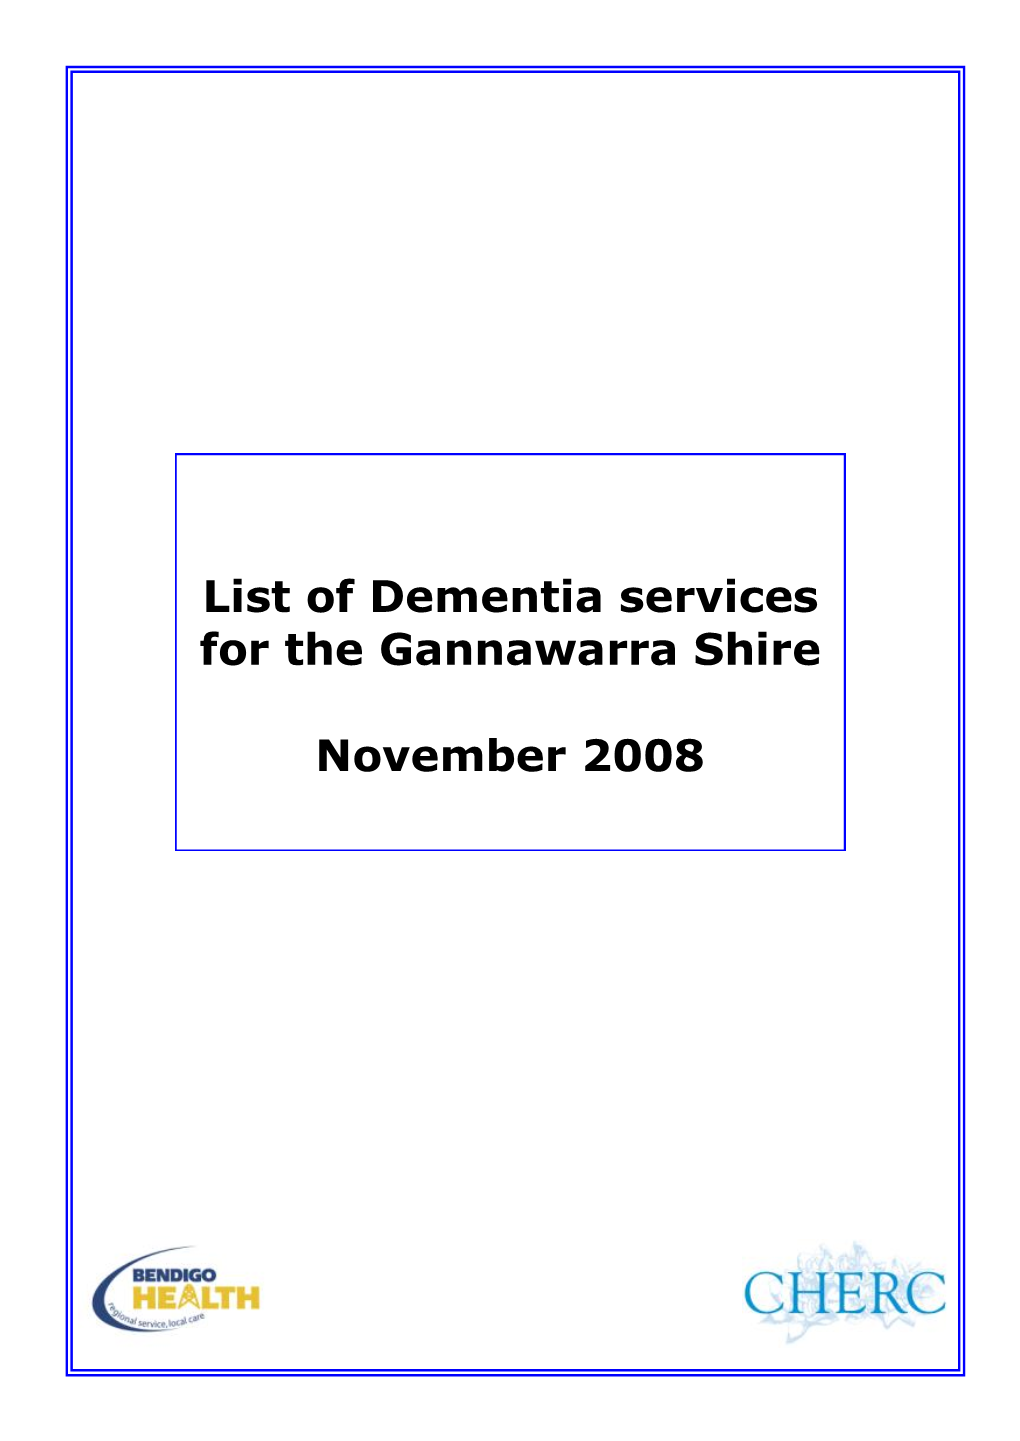 List of Dementia Services for the Gannawarra Shire November 2008